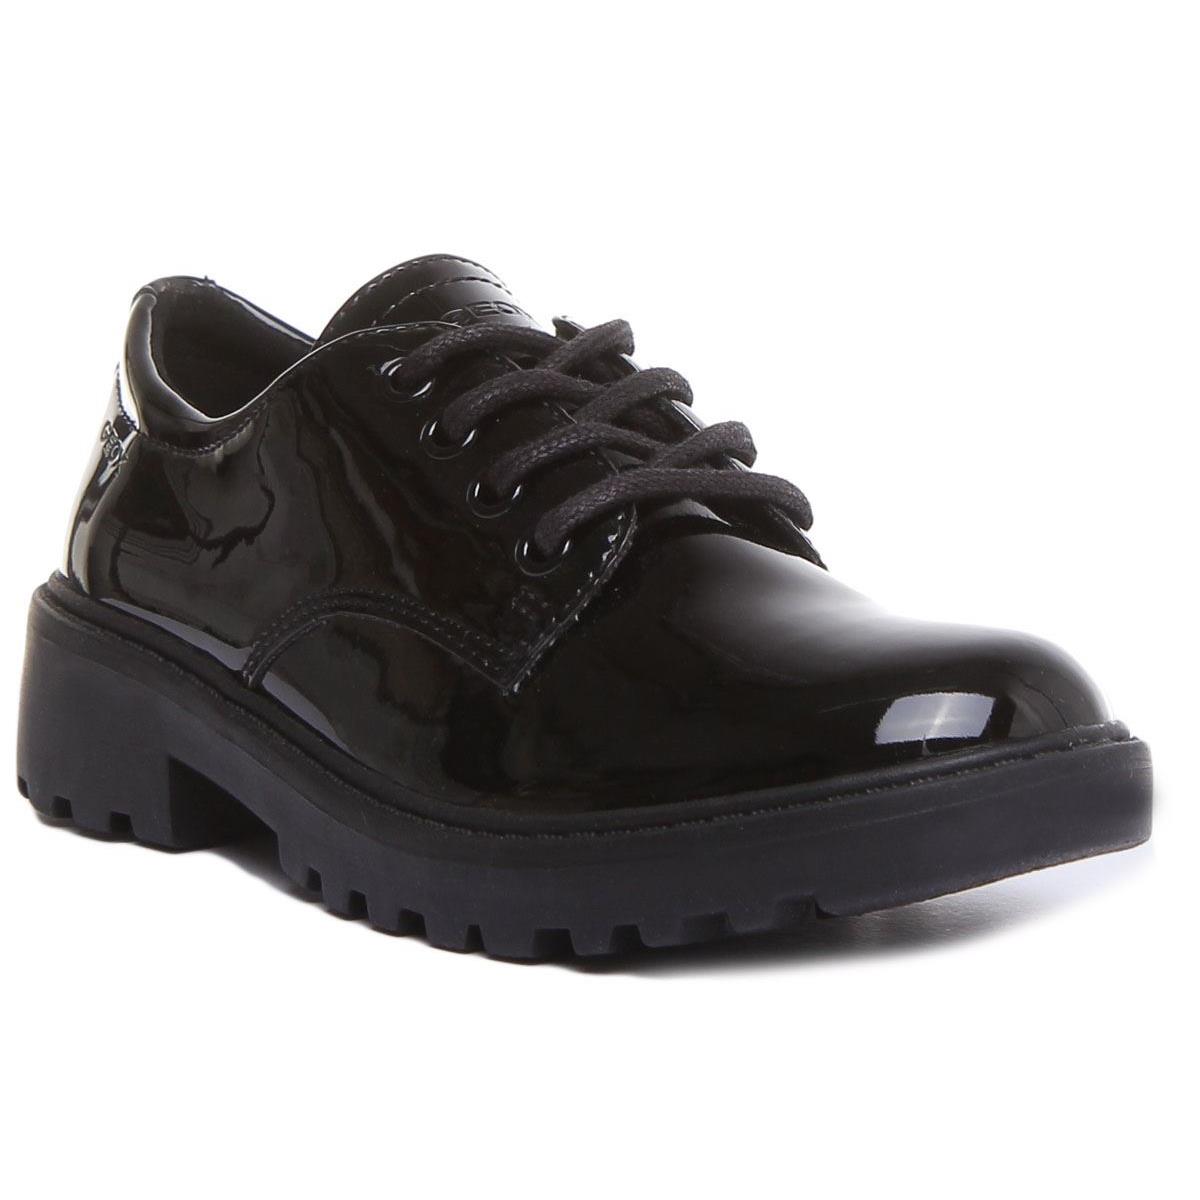 Geox J Casey Girls Lace Up Leather School Shoe In Black Patent Size US 10 - 4 Black Patent